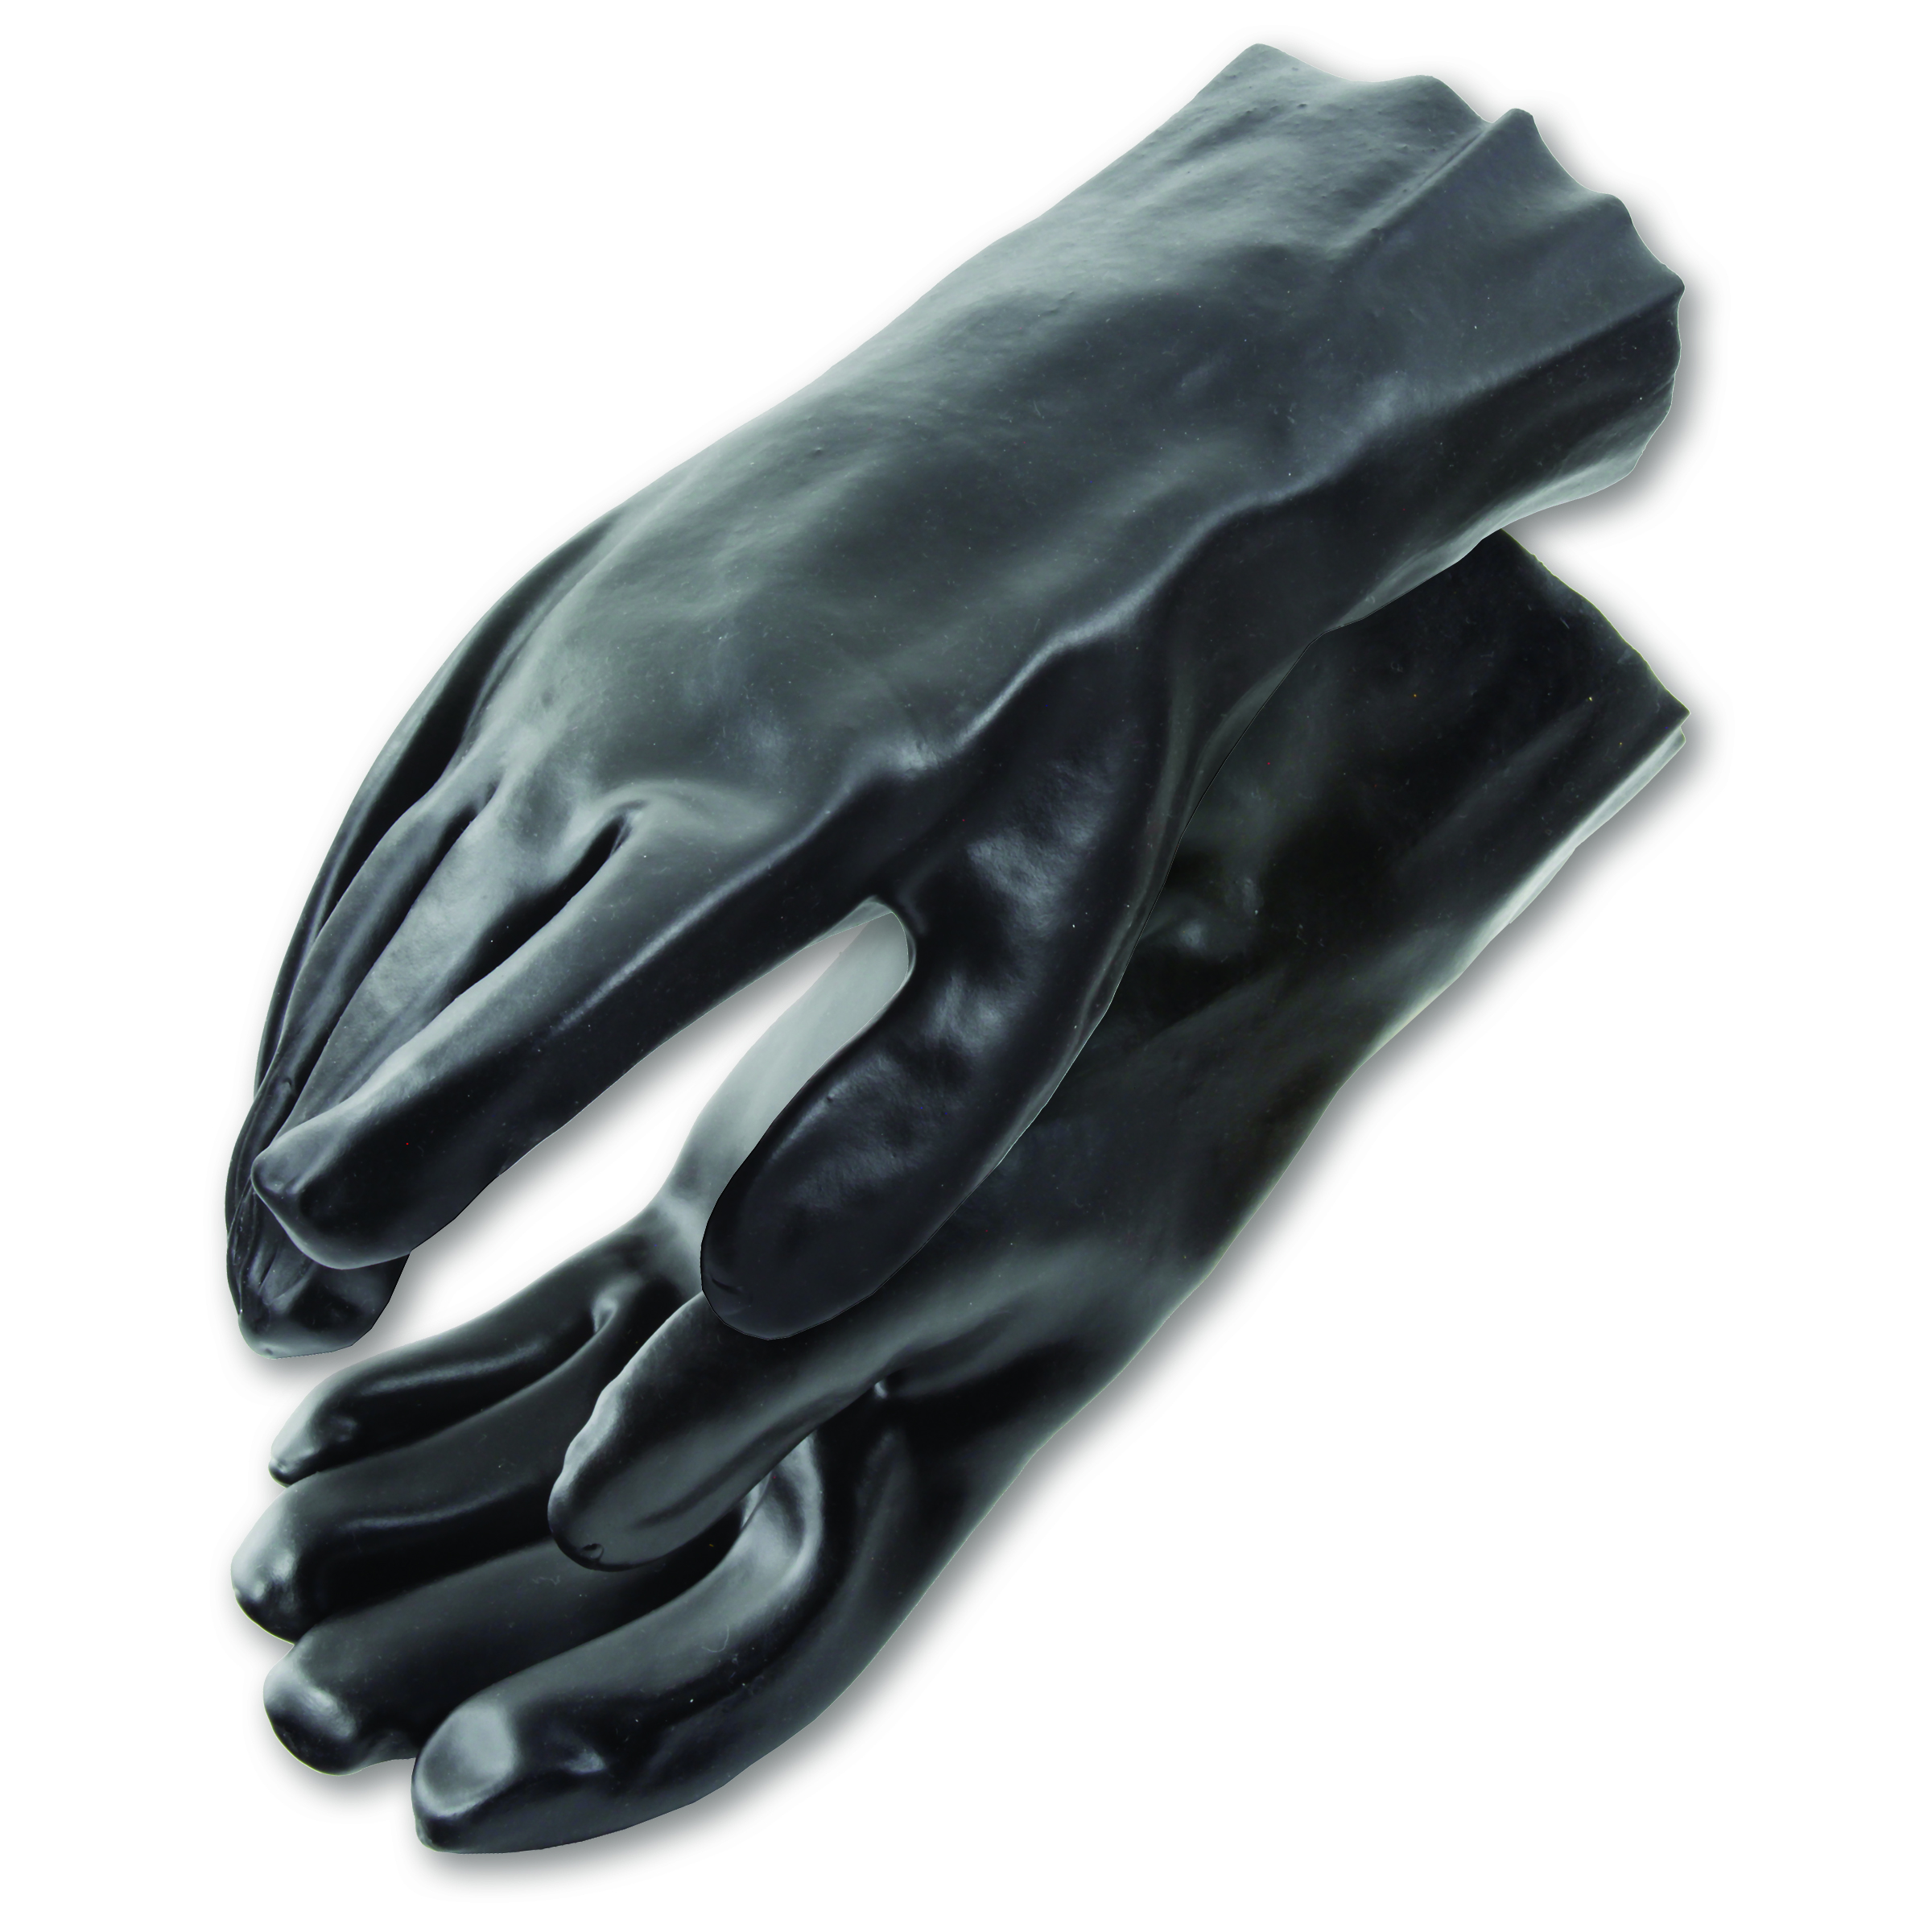 PVC Coated Gloves, 12 Inch